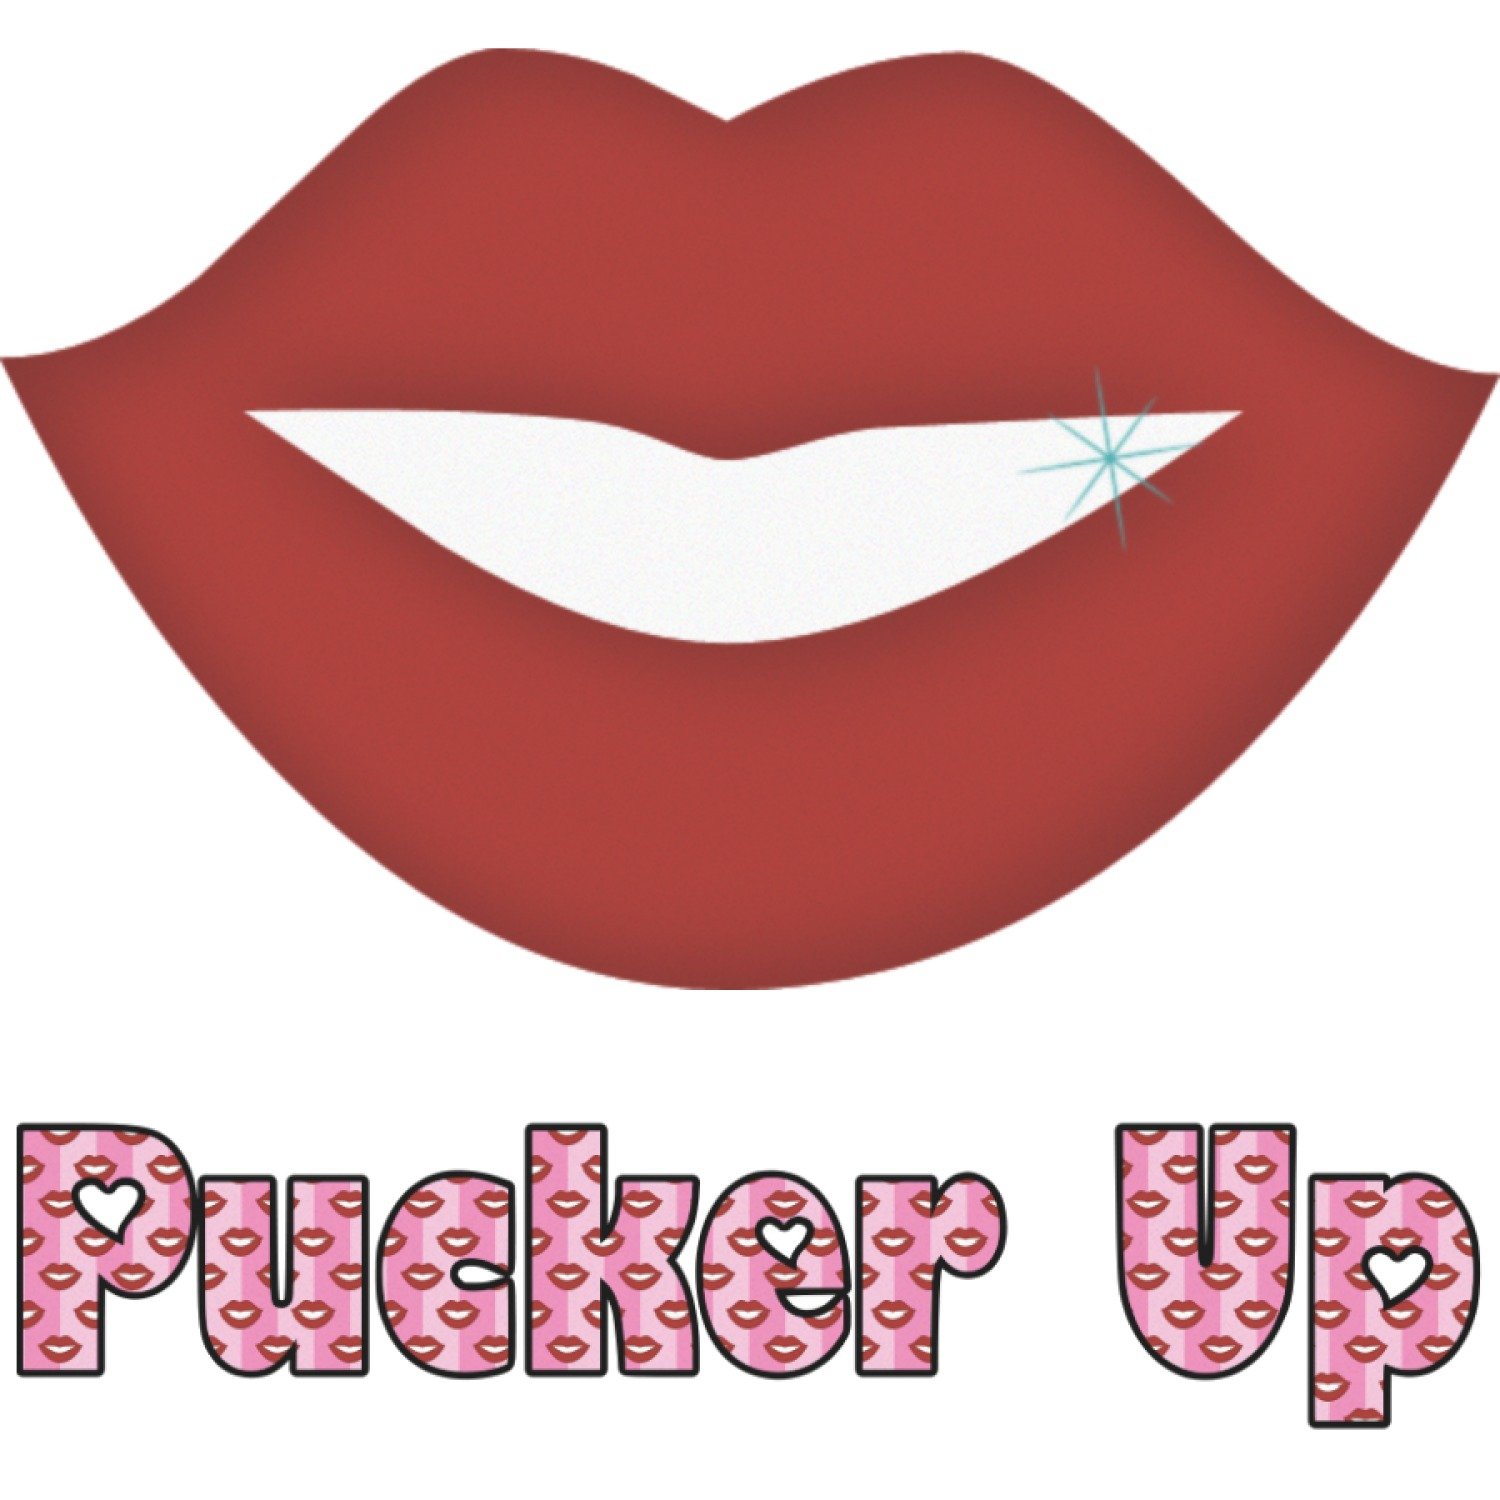 Amazon.com: RNK Shops Lips (Pucker Up) Graphic Decal.